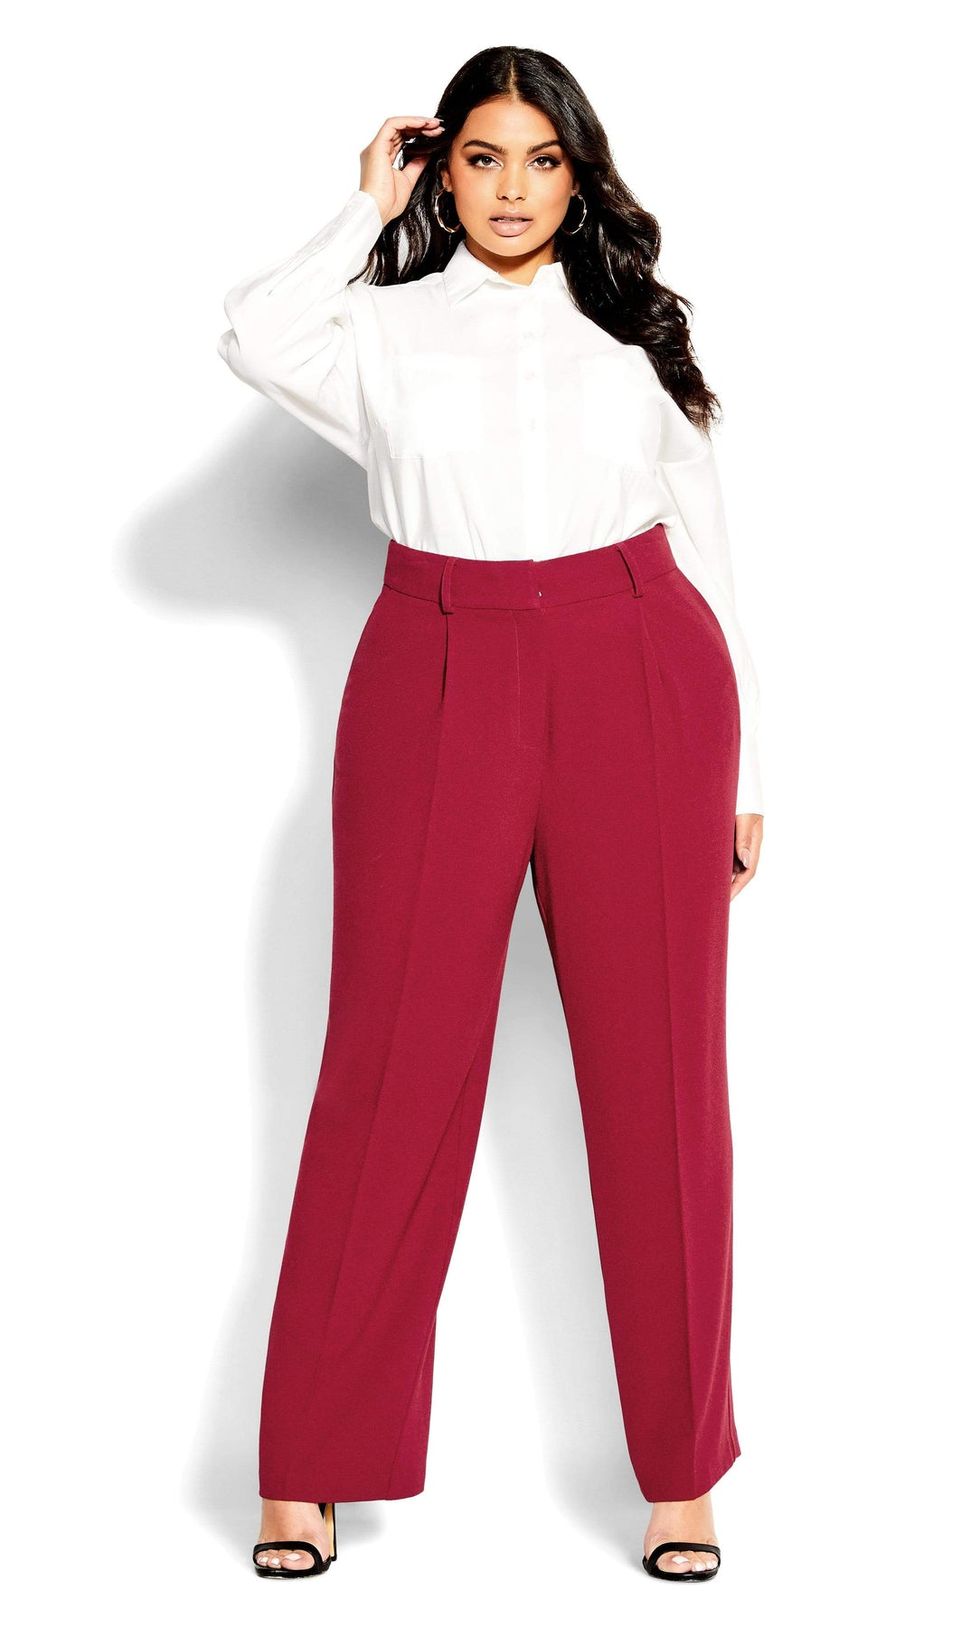 Red Pants Outfits For Women (283 ideas & outfits)